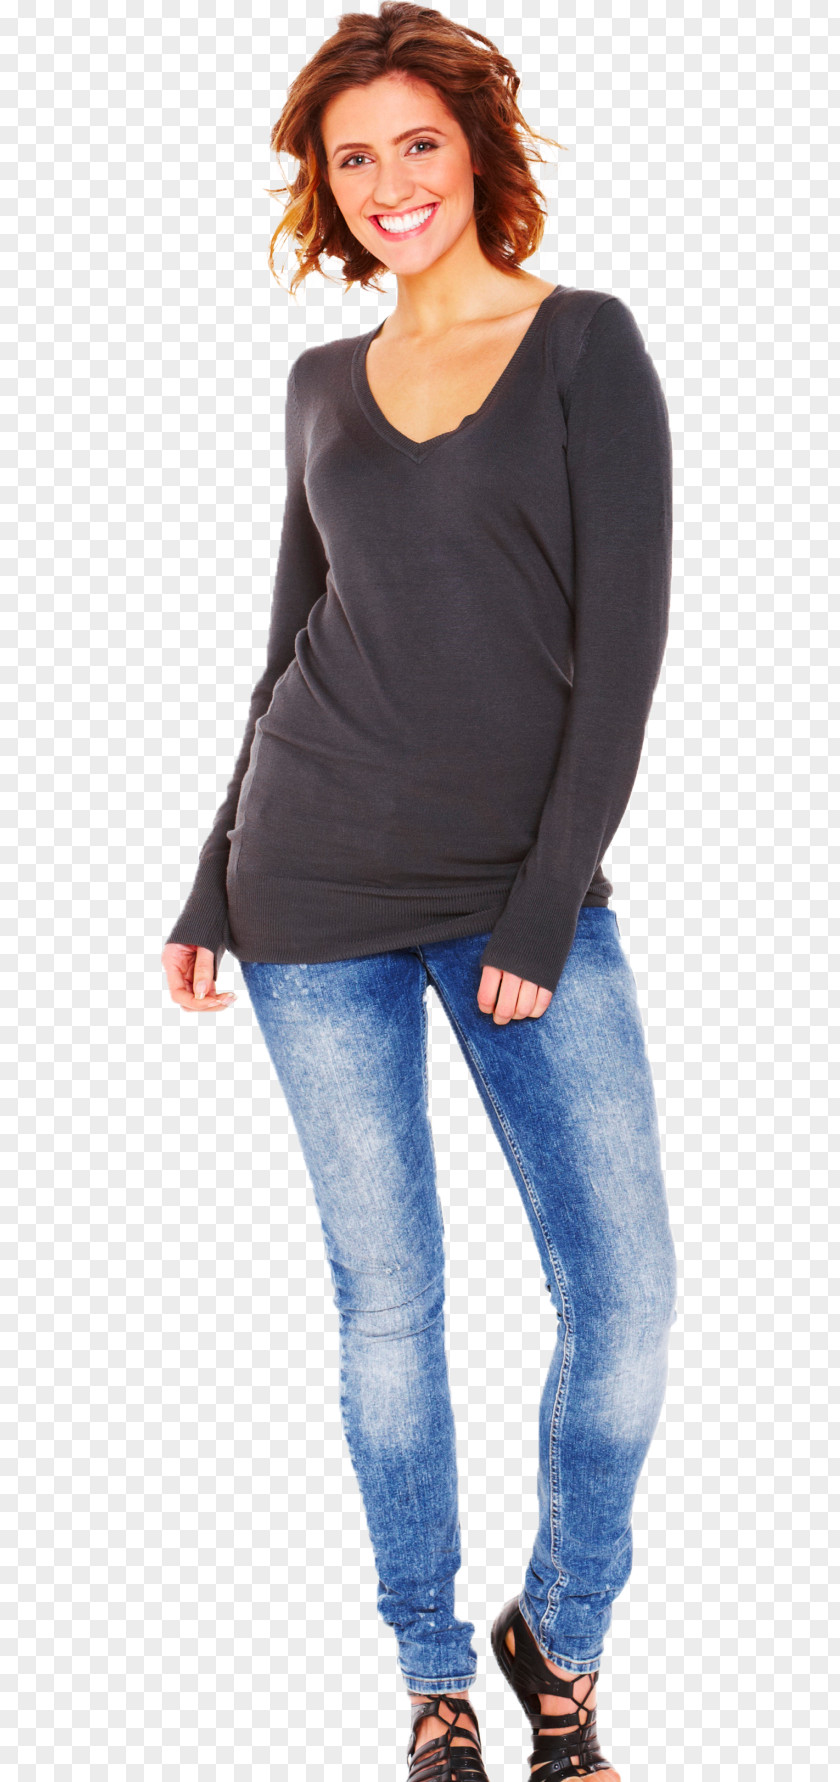 Jeans Woman ISOCYCLE SAS PNG